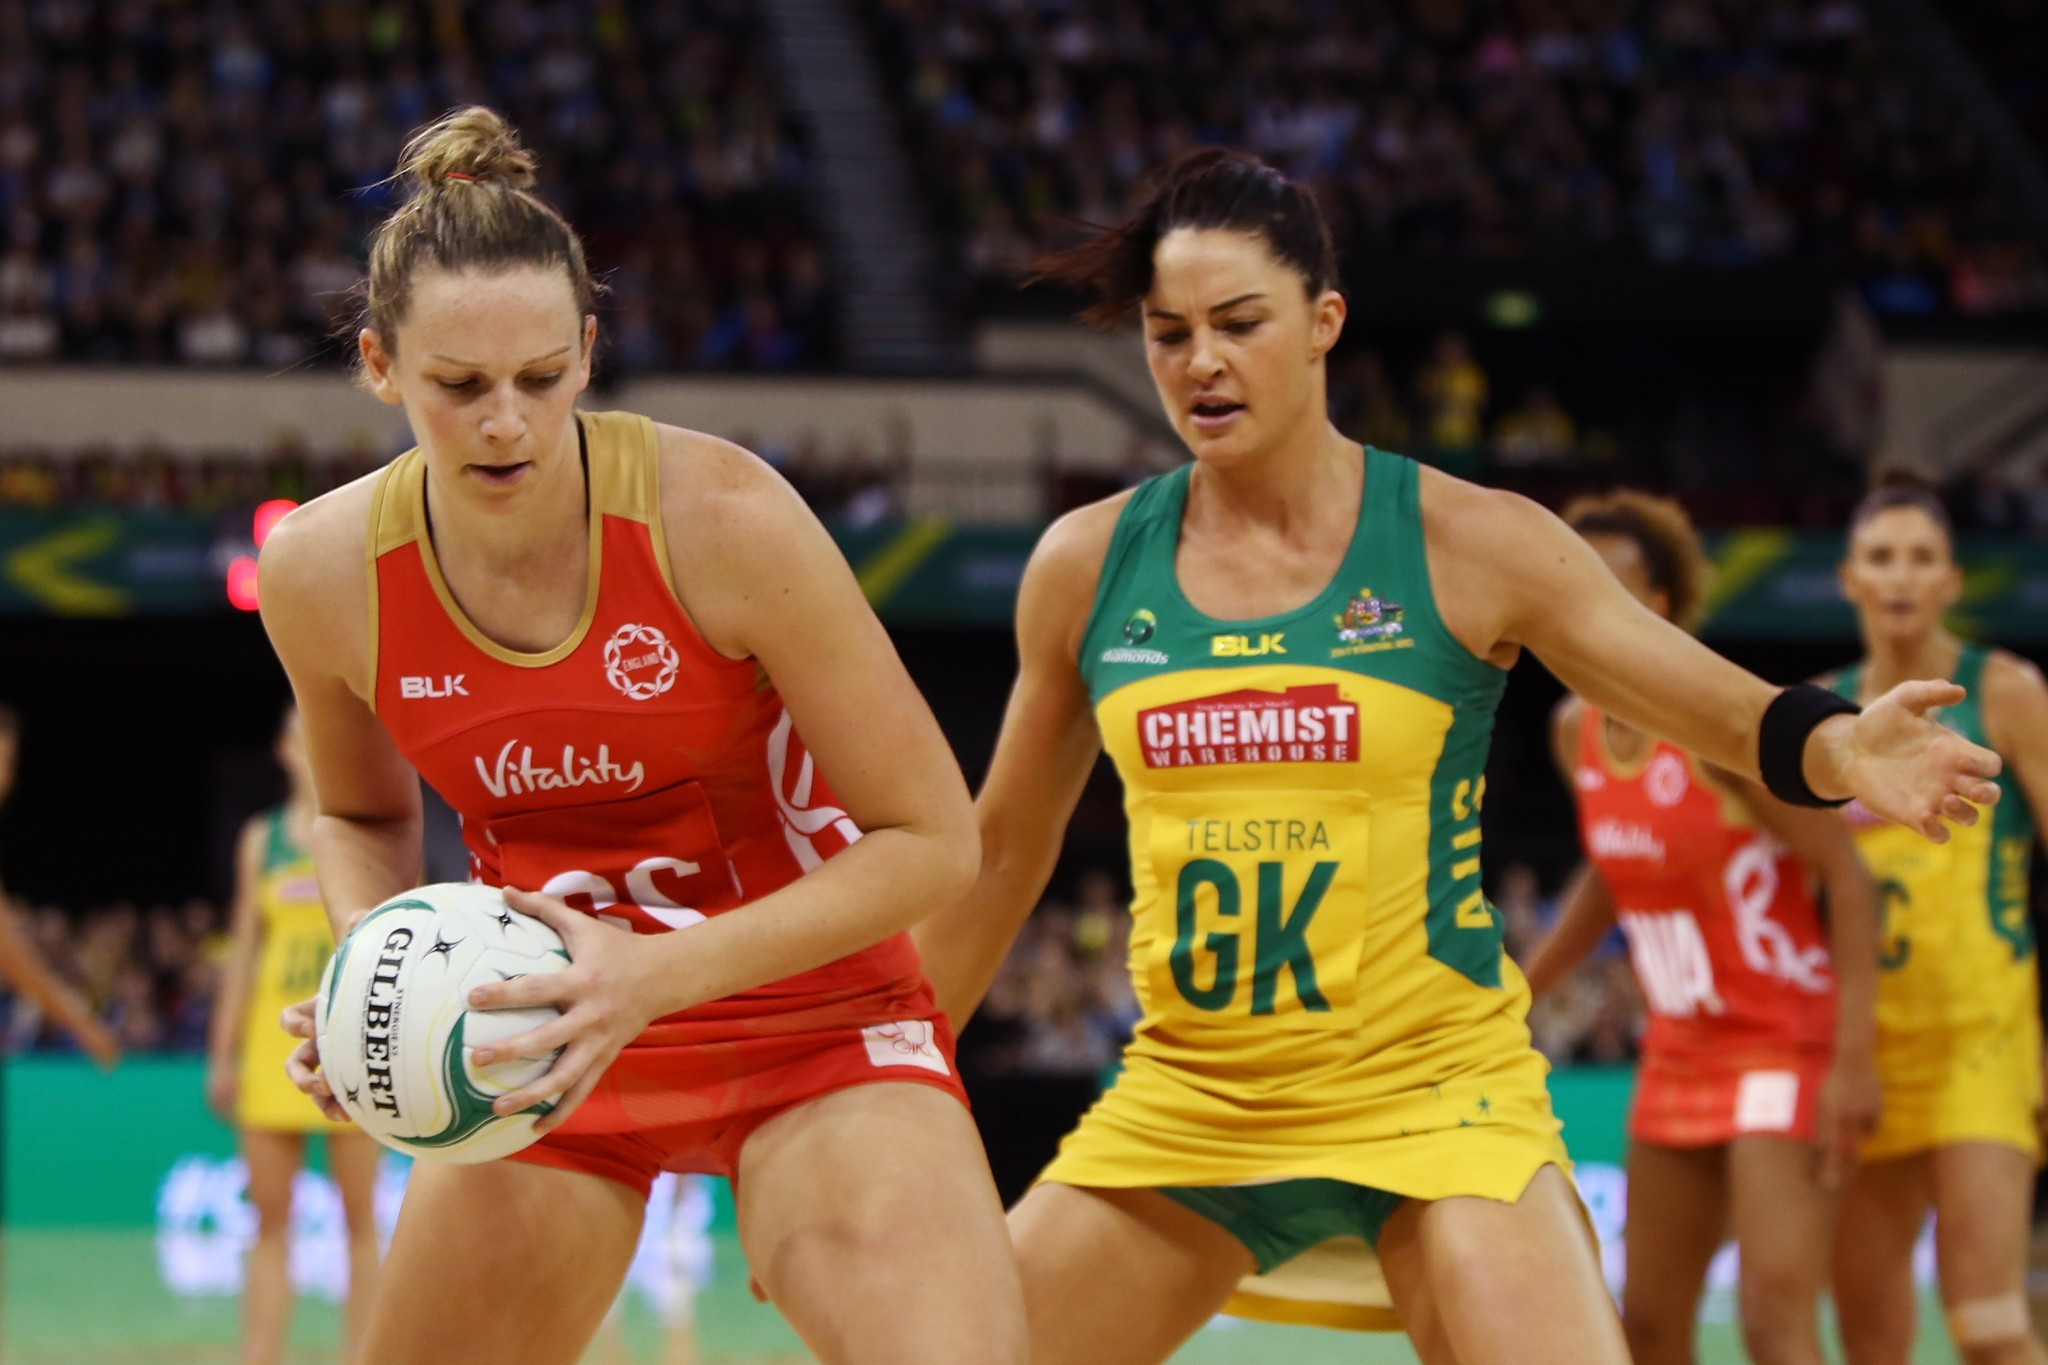 England star says Commonwealth Games is biggest event for netball